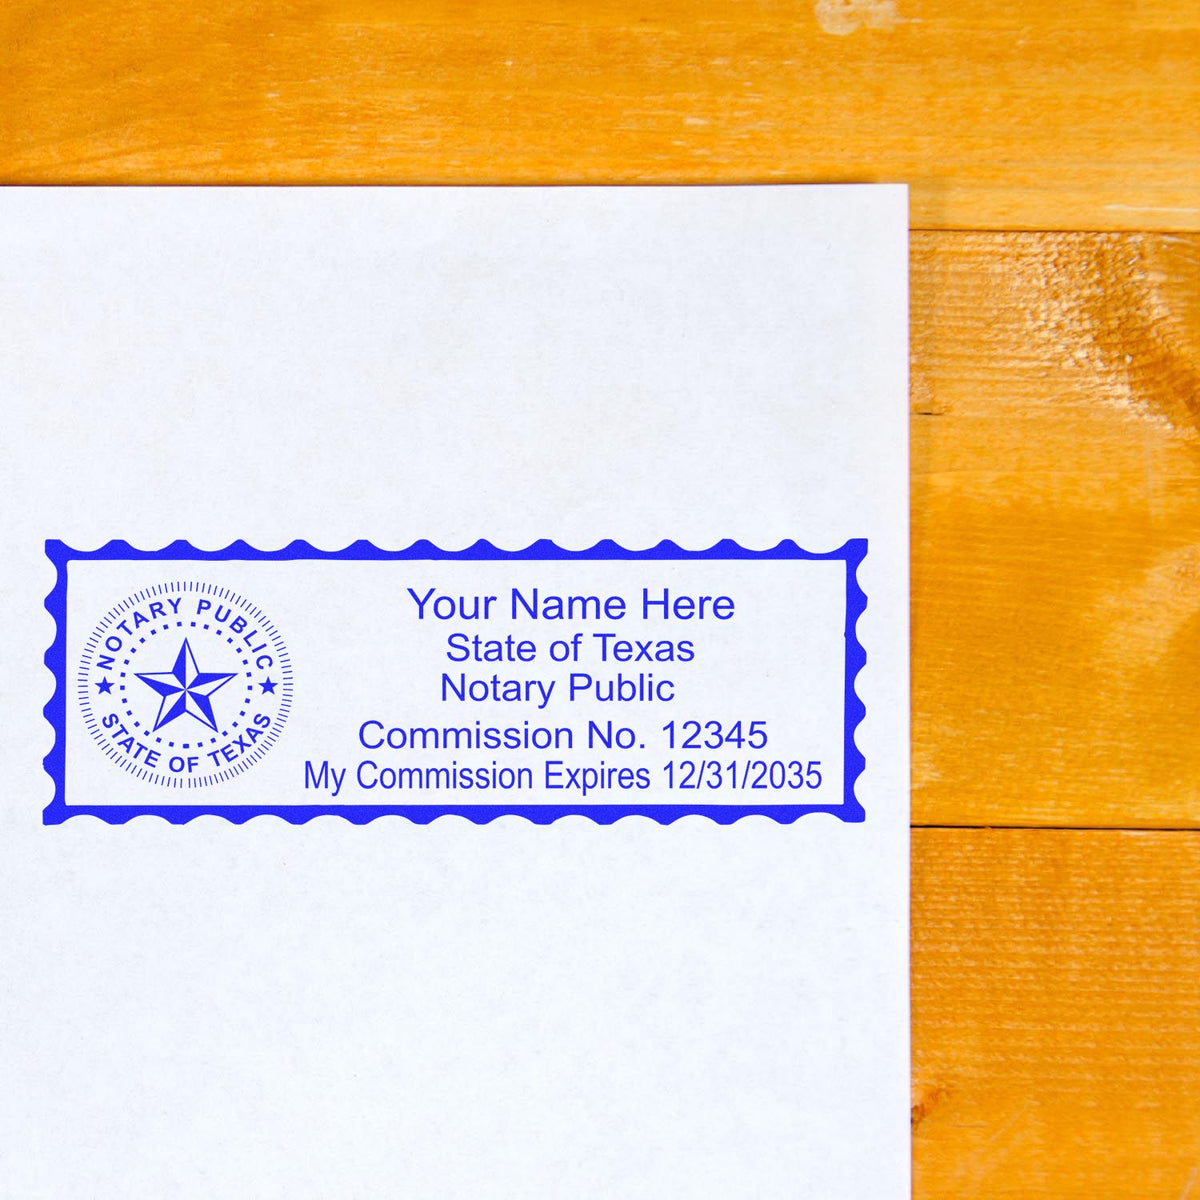 An alternative view of the PSI Texas Notary Stamp stamped on a sheet of paper showing the image in use